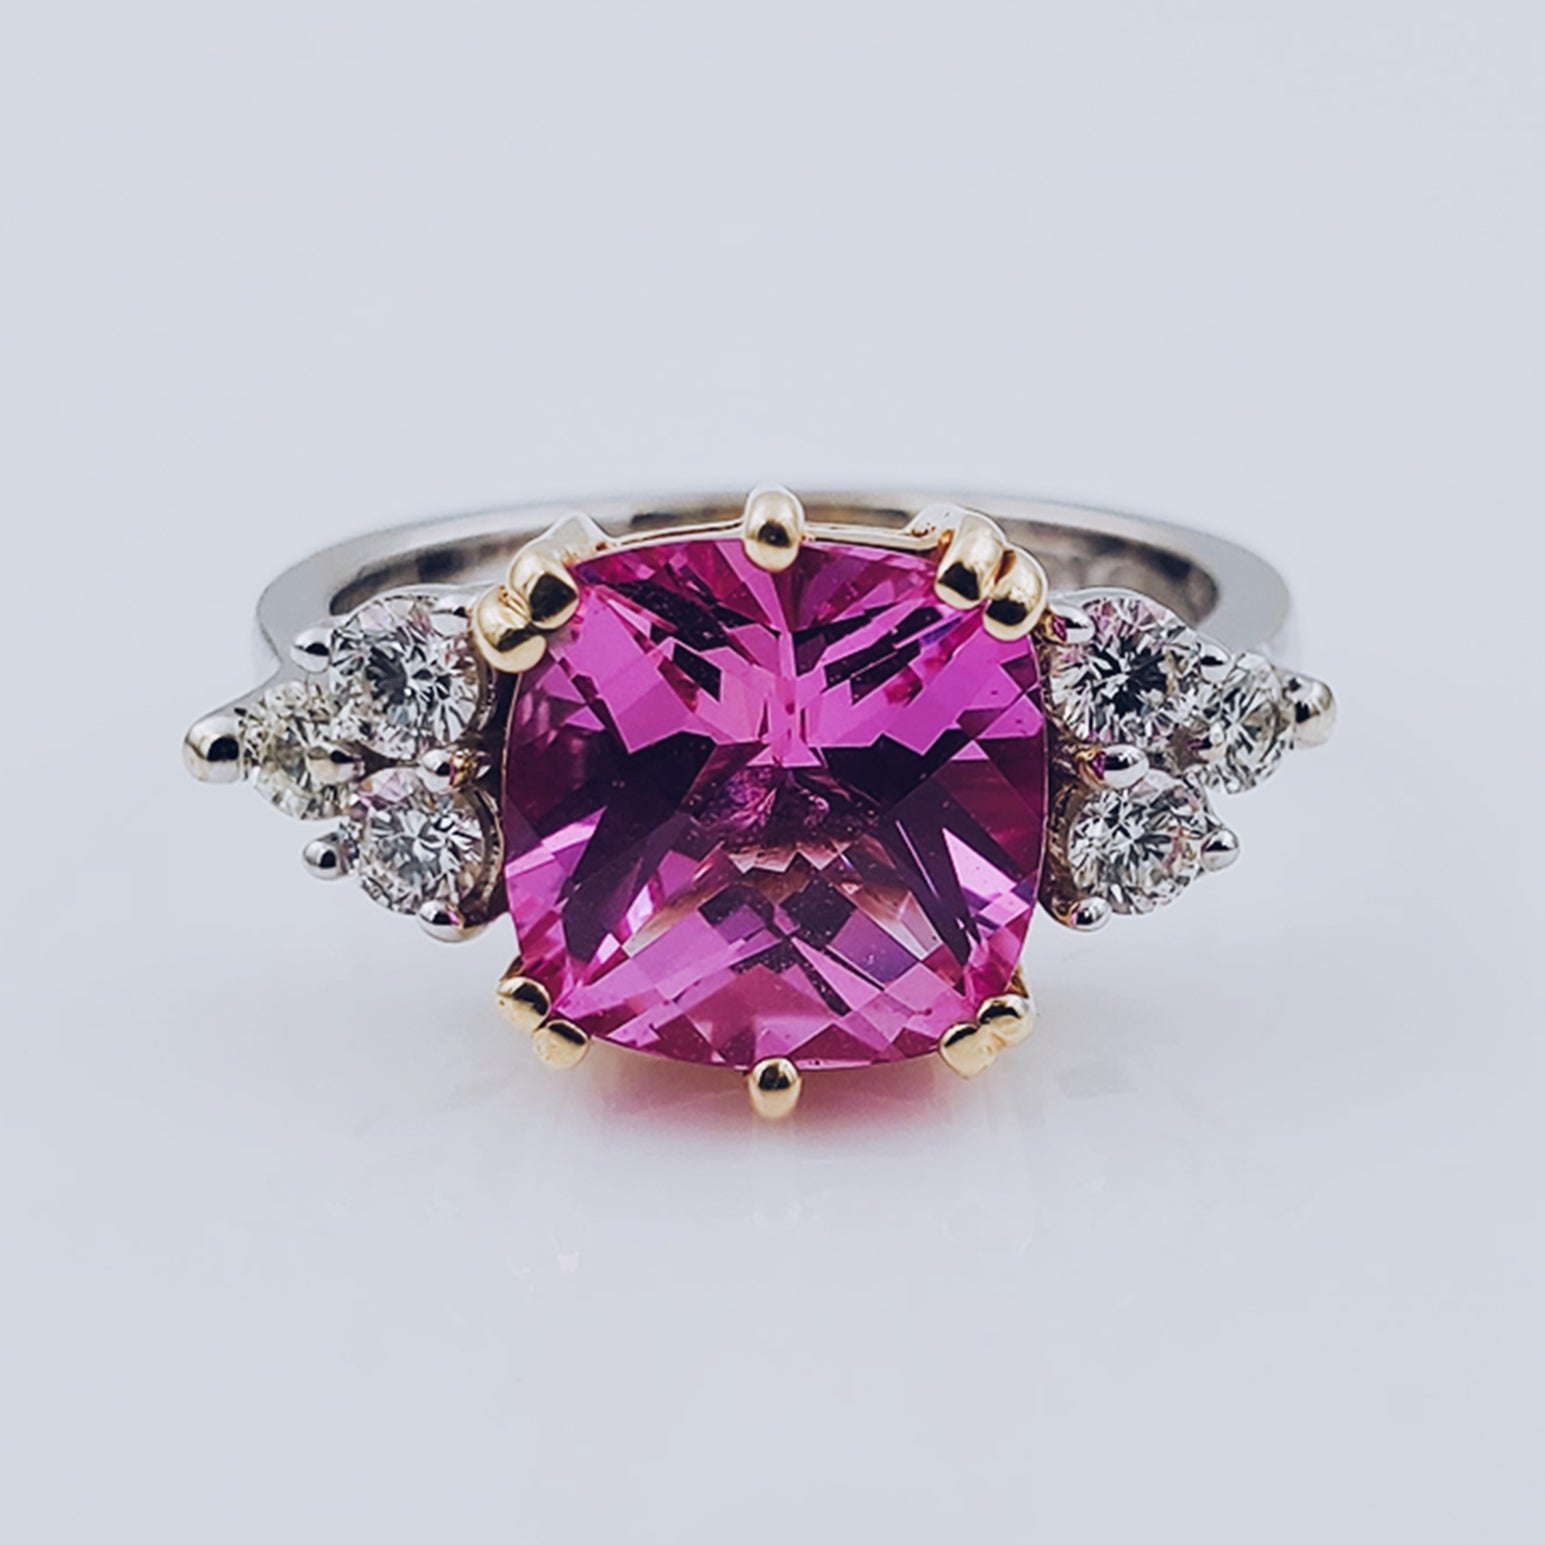 Women's 14K White Gold 6 Diamonds (0.48 CT) with Pink Sapphire Center Stone 6.00 CT (SI 3 Color F) 6.2 GR Anniversary Band. (Size: 6.5)